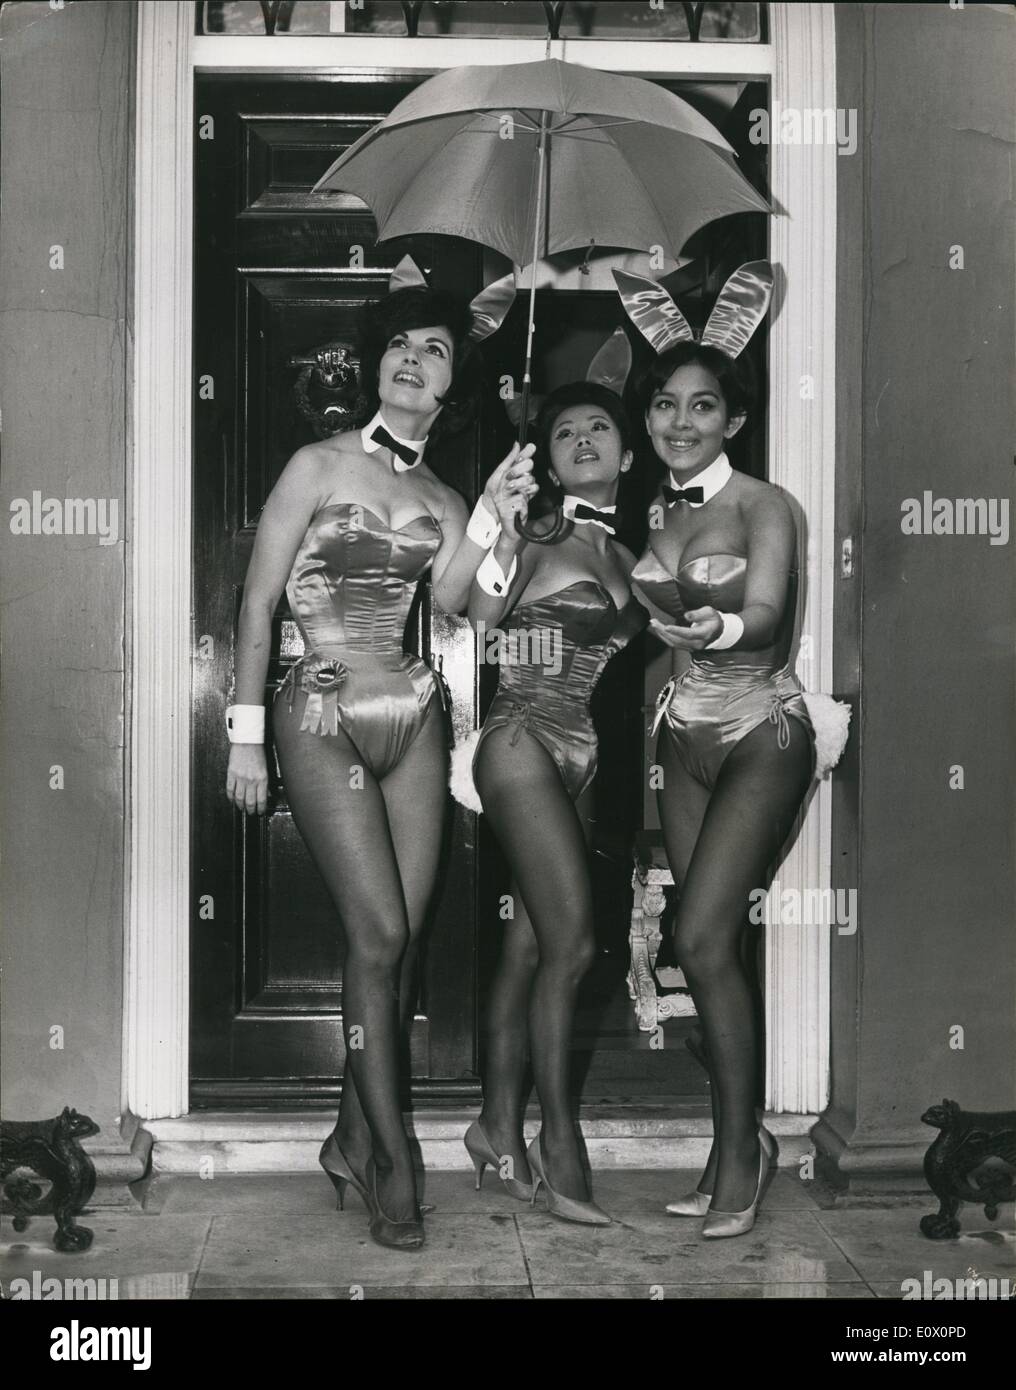 Oct. 10, 1964 - Playboy Club Bunnies in London: Seven beautiful bunnies from America's famous Playboy Clubs, have arrived in London for a week's visit. The girls all 'Bunny Award' winners chosen from over 700 bunnies who staff the ten Playboy clubs, were selected for their appearance, graciousness and popularity. While in London they will appear on a number of television programmes. Photo shows Three of the bunnies share an umbrella in rainy London today. They are (L to R): Martha Louise Hellwig, of New Orleans, Elizabeth Yee, of New York; and Katherine Fitzpatrick of Detroit. Stock Photo